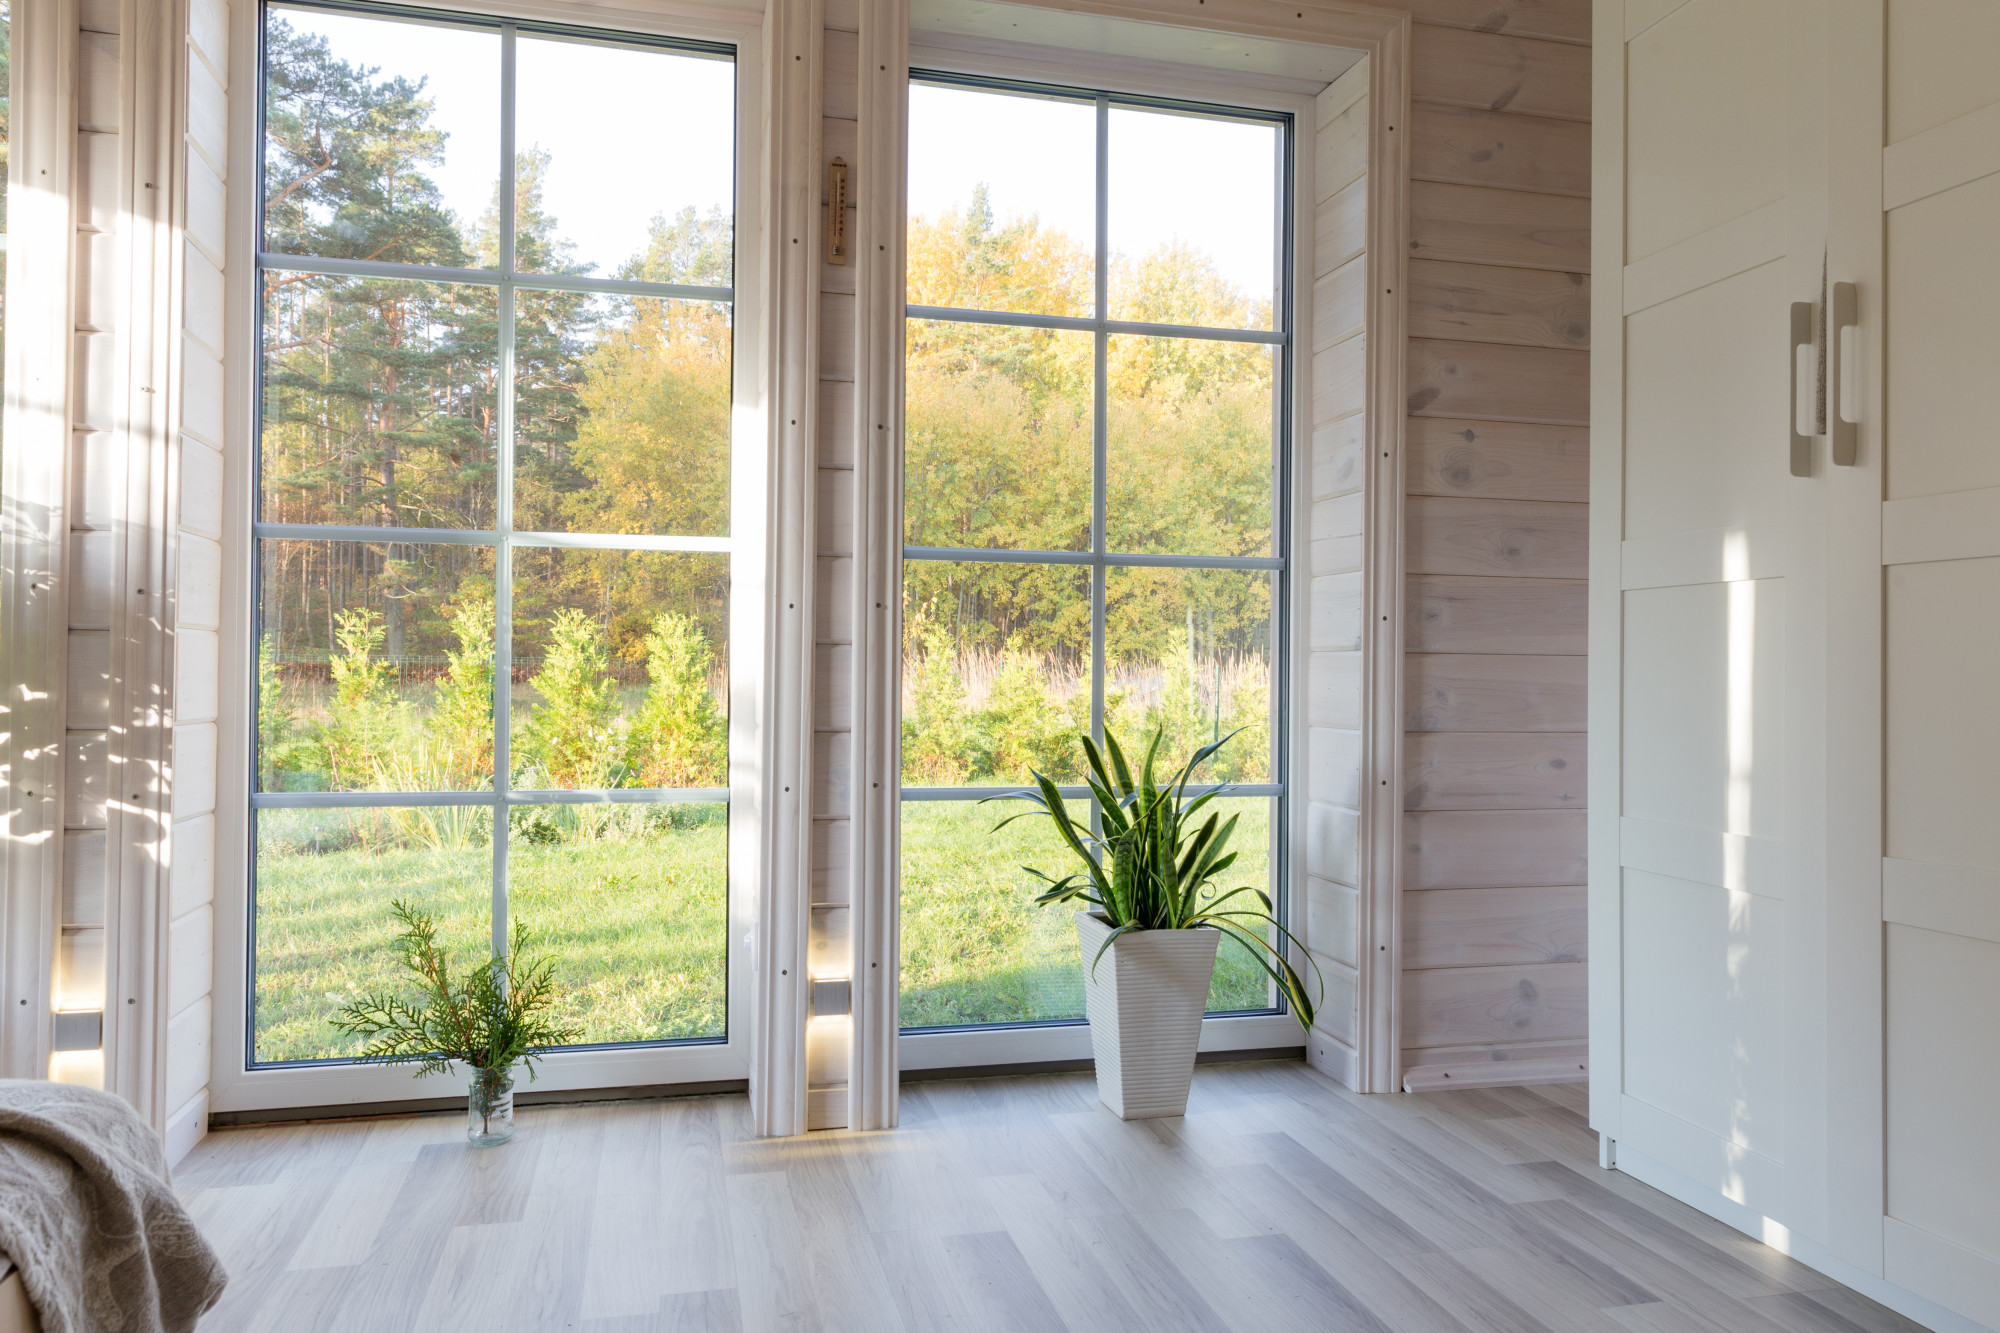 What You Should Know Before Adding Floor-to-Ceiling Windows to Your Home